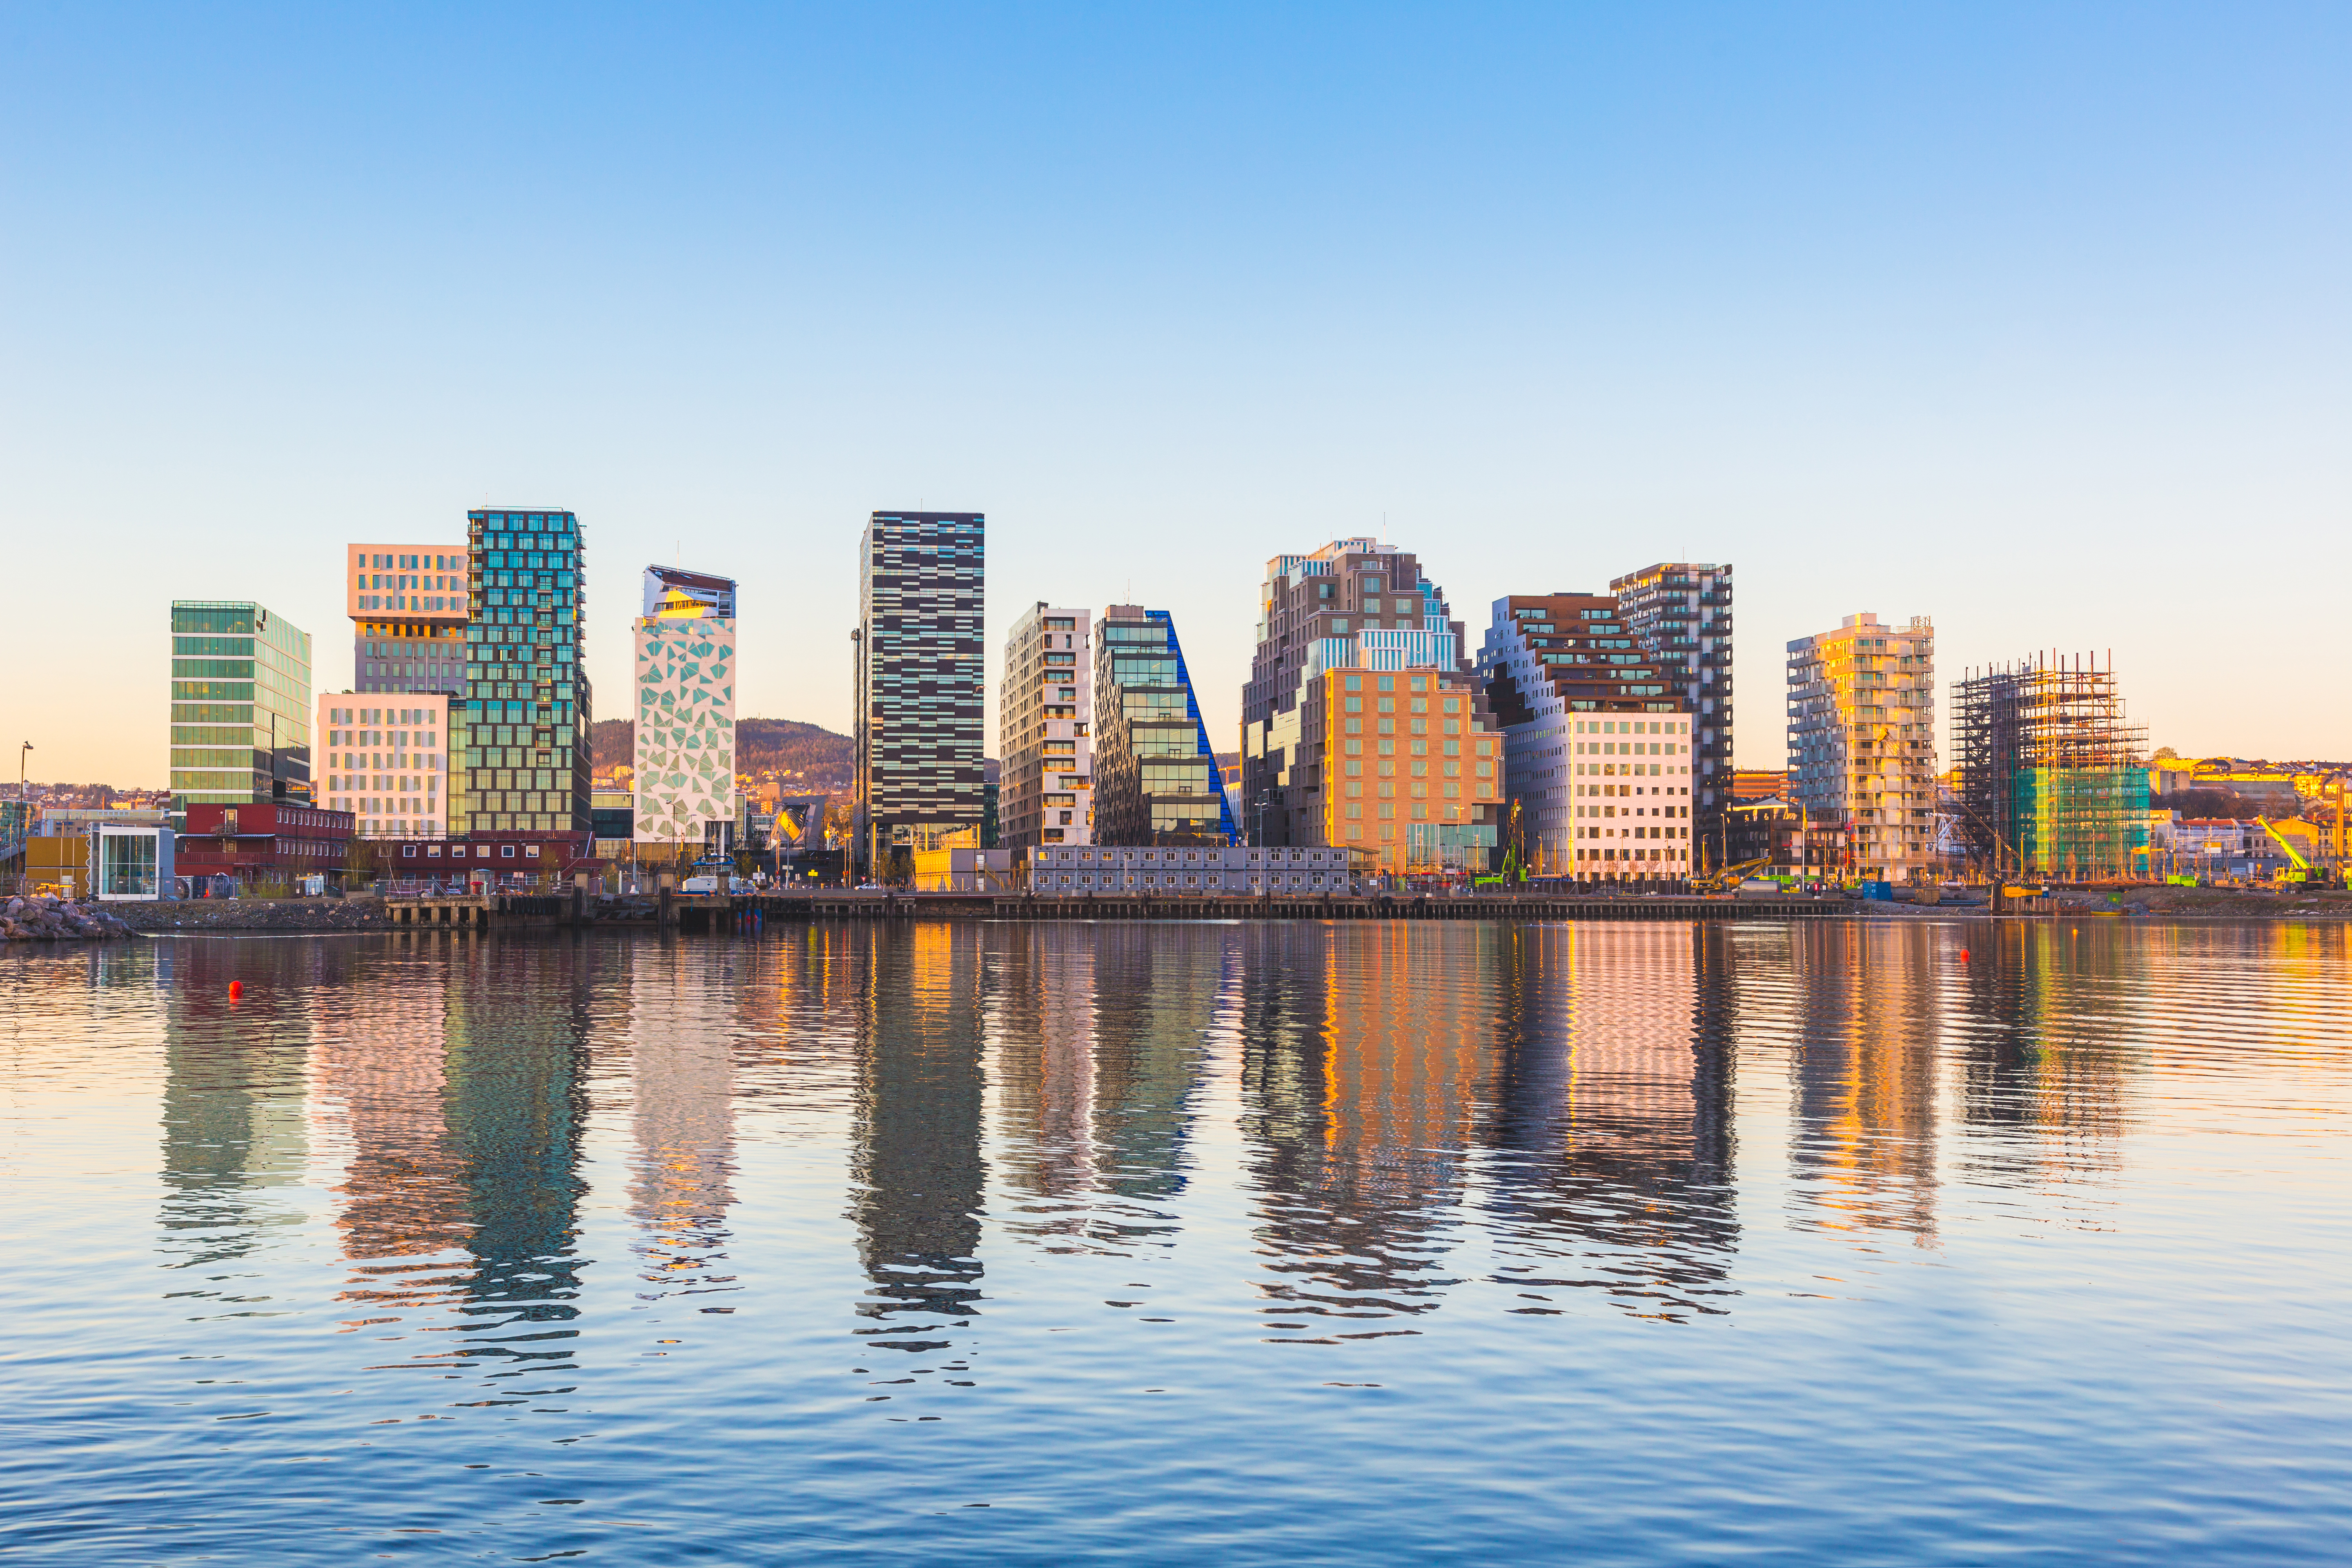 View of modern Oslo buildings, reflecting off the water at sunrise.